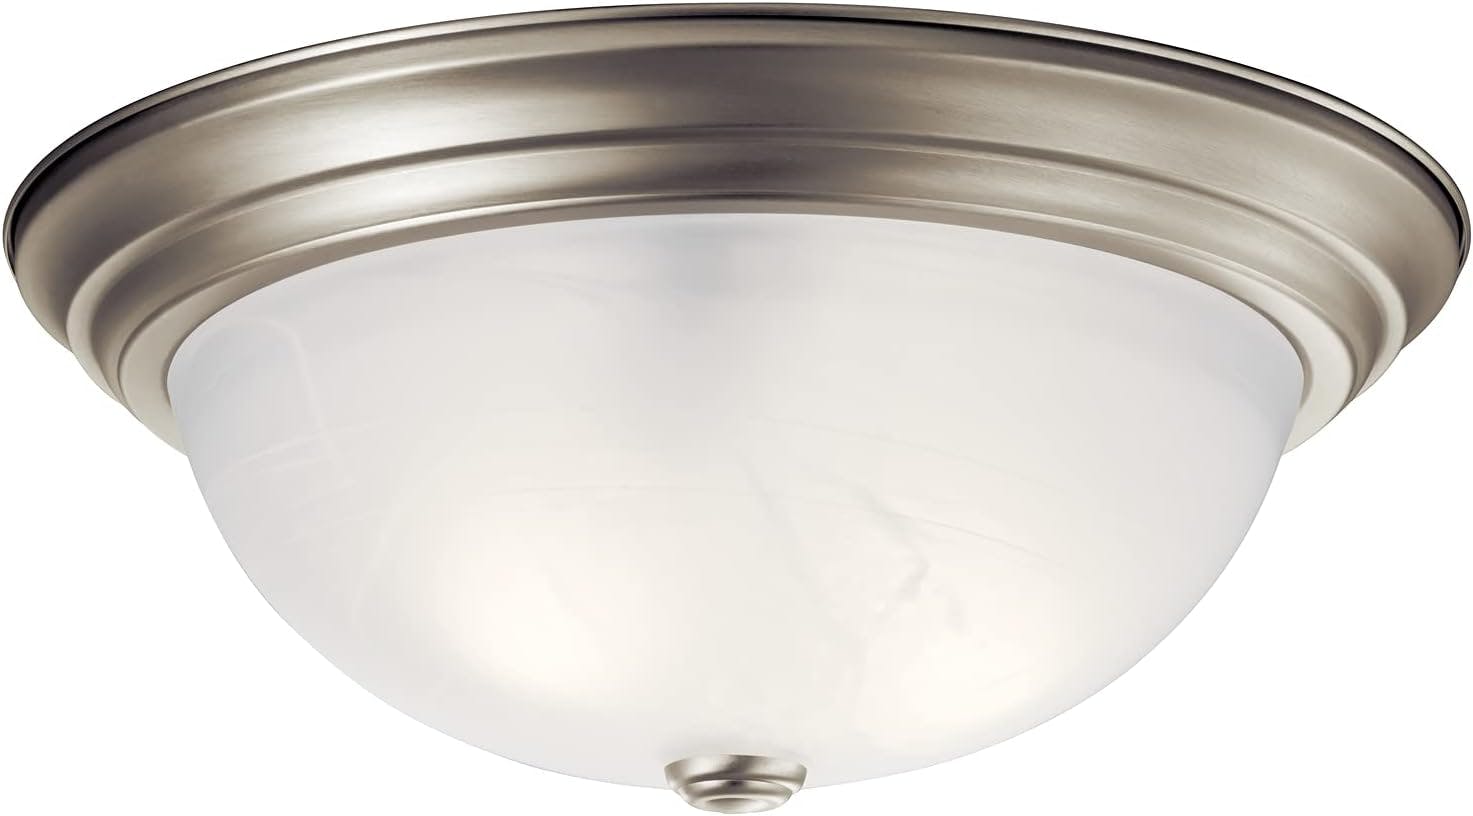 Transitional 15'' Distressed Bronze Flush Mount Ceiling Light with White Dome Shade